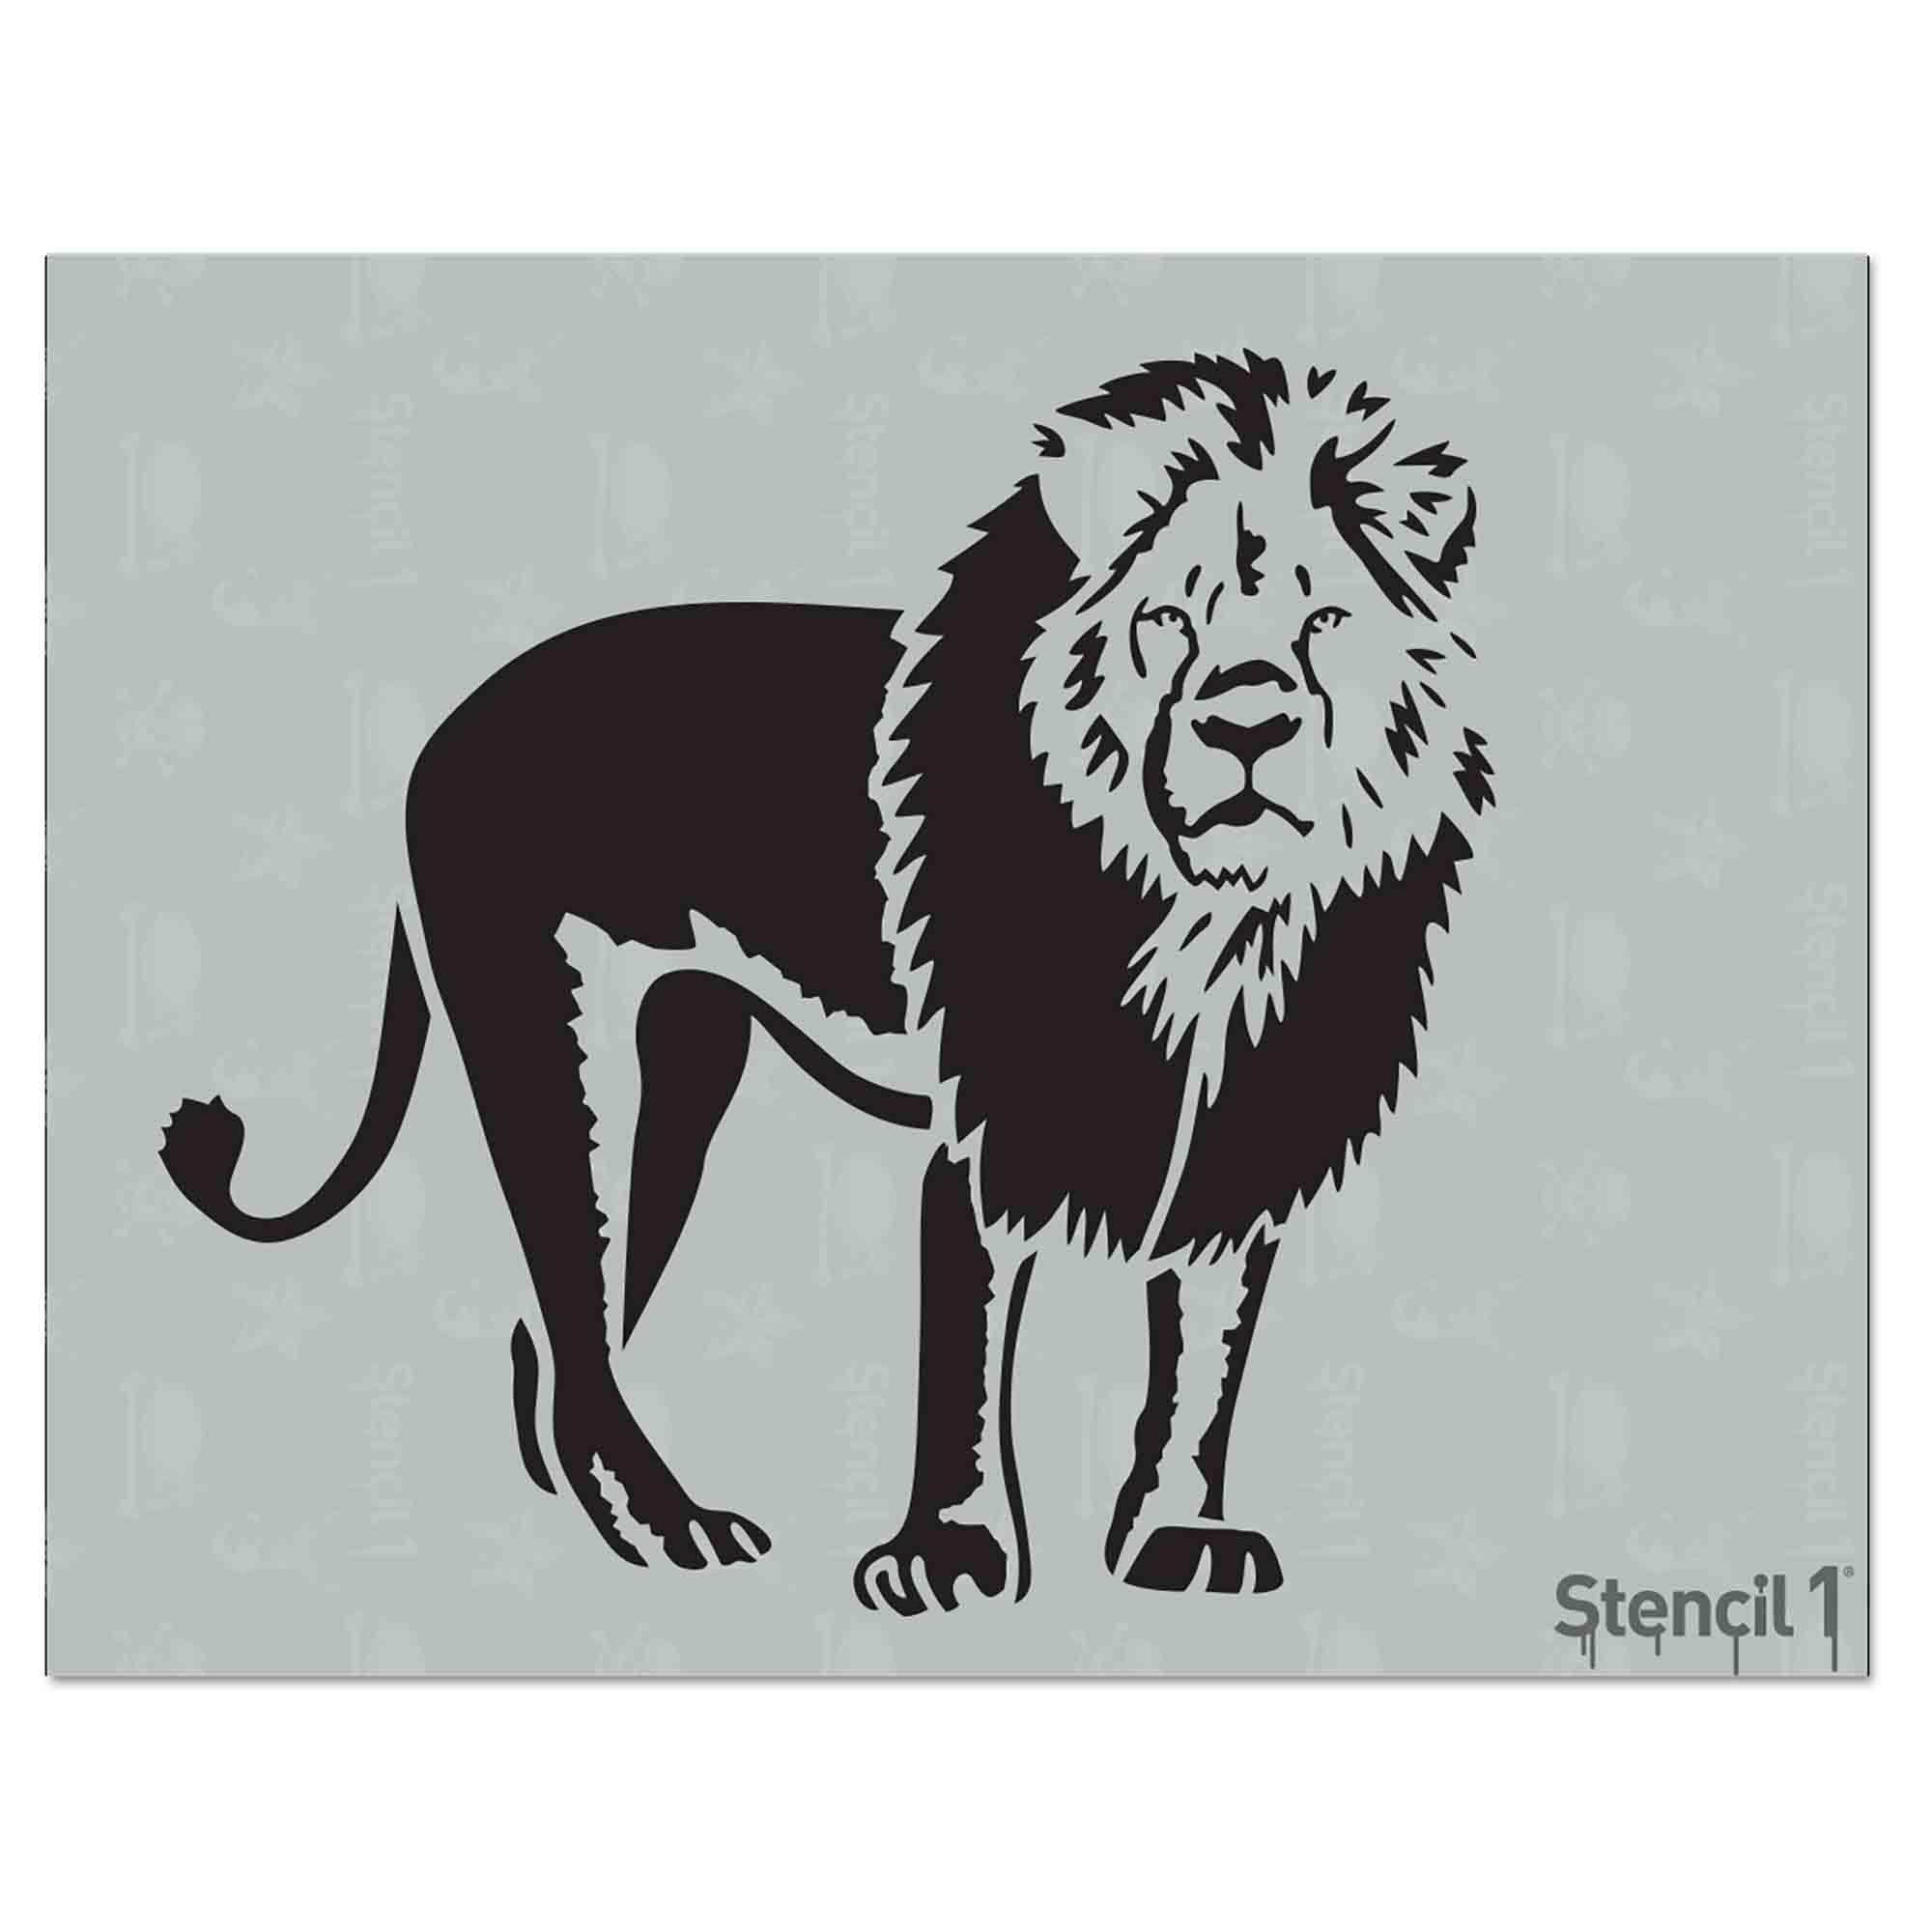 Custom Lion Stencils Fast Free Shipping Up to 10" inches Lion Stencil 